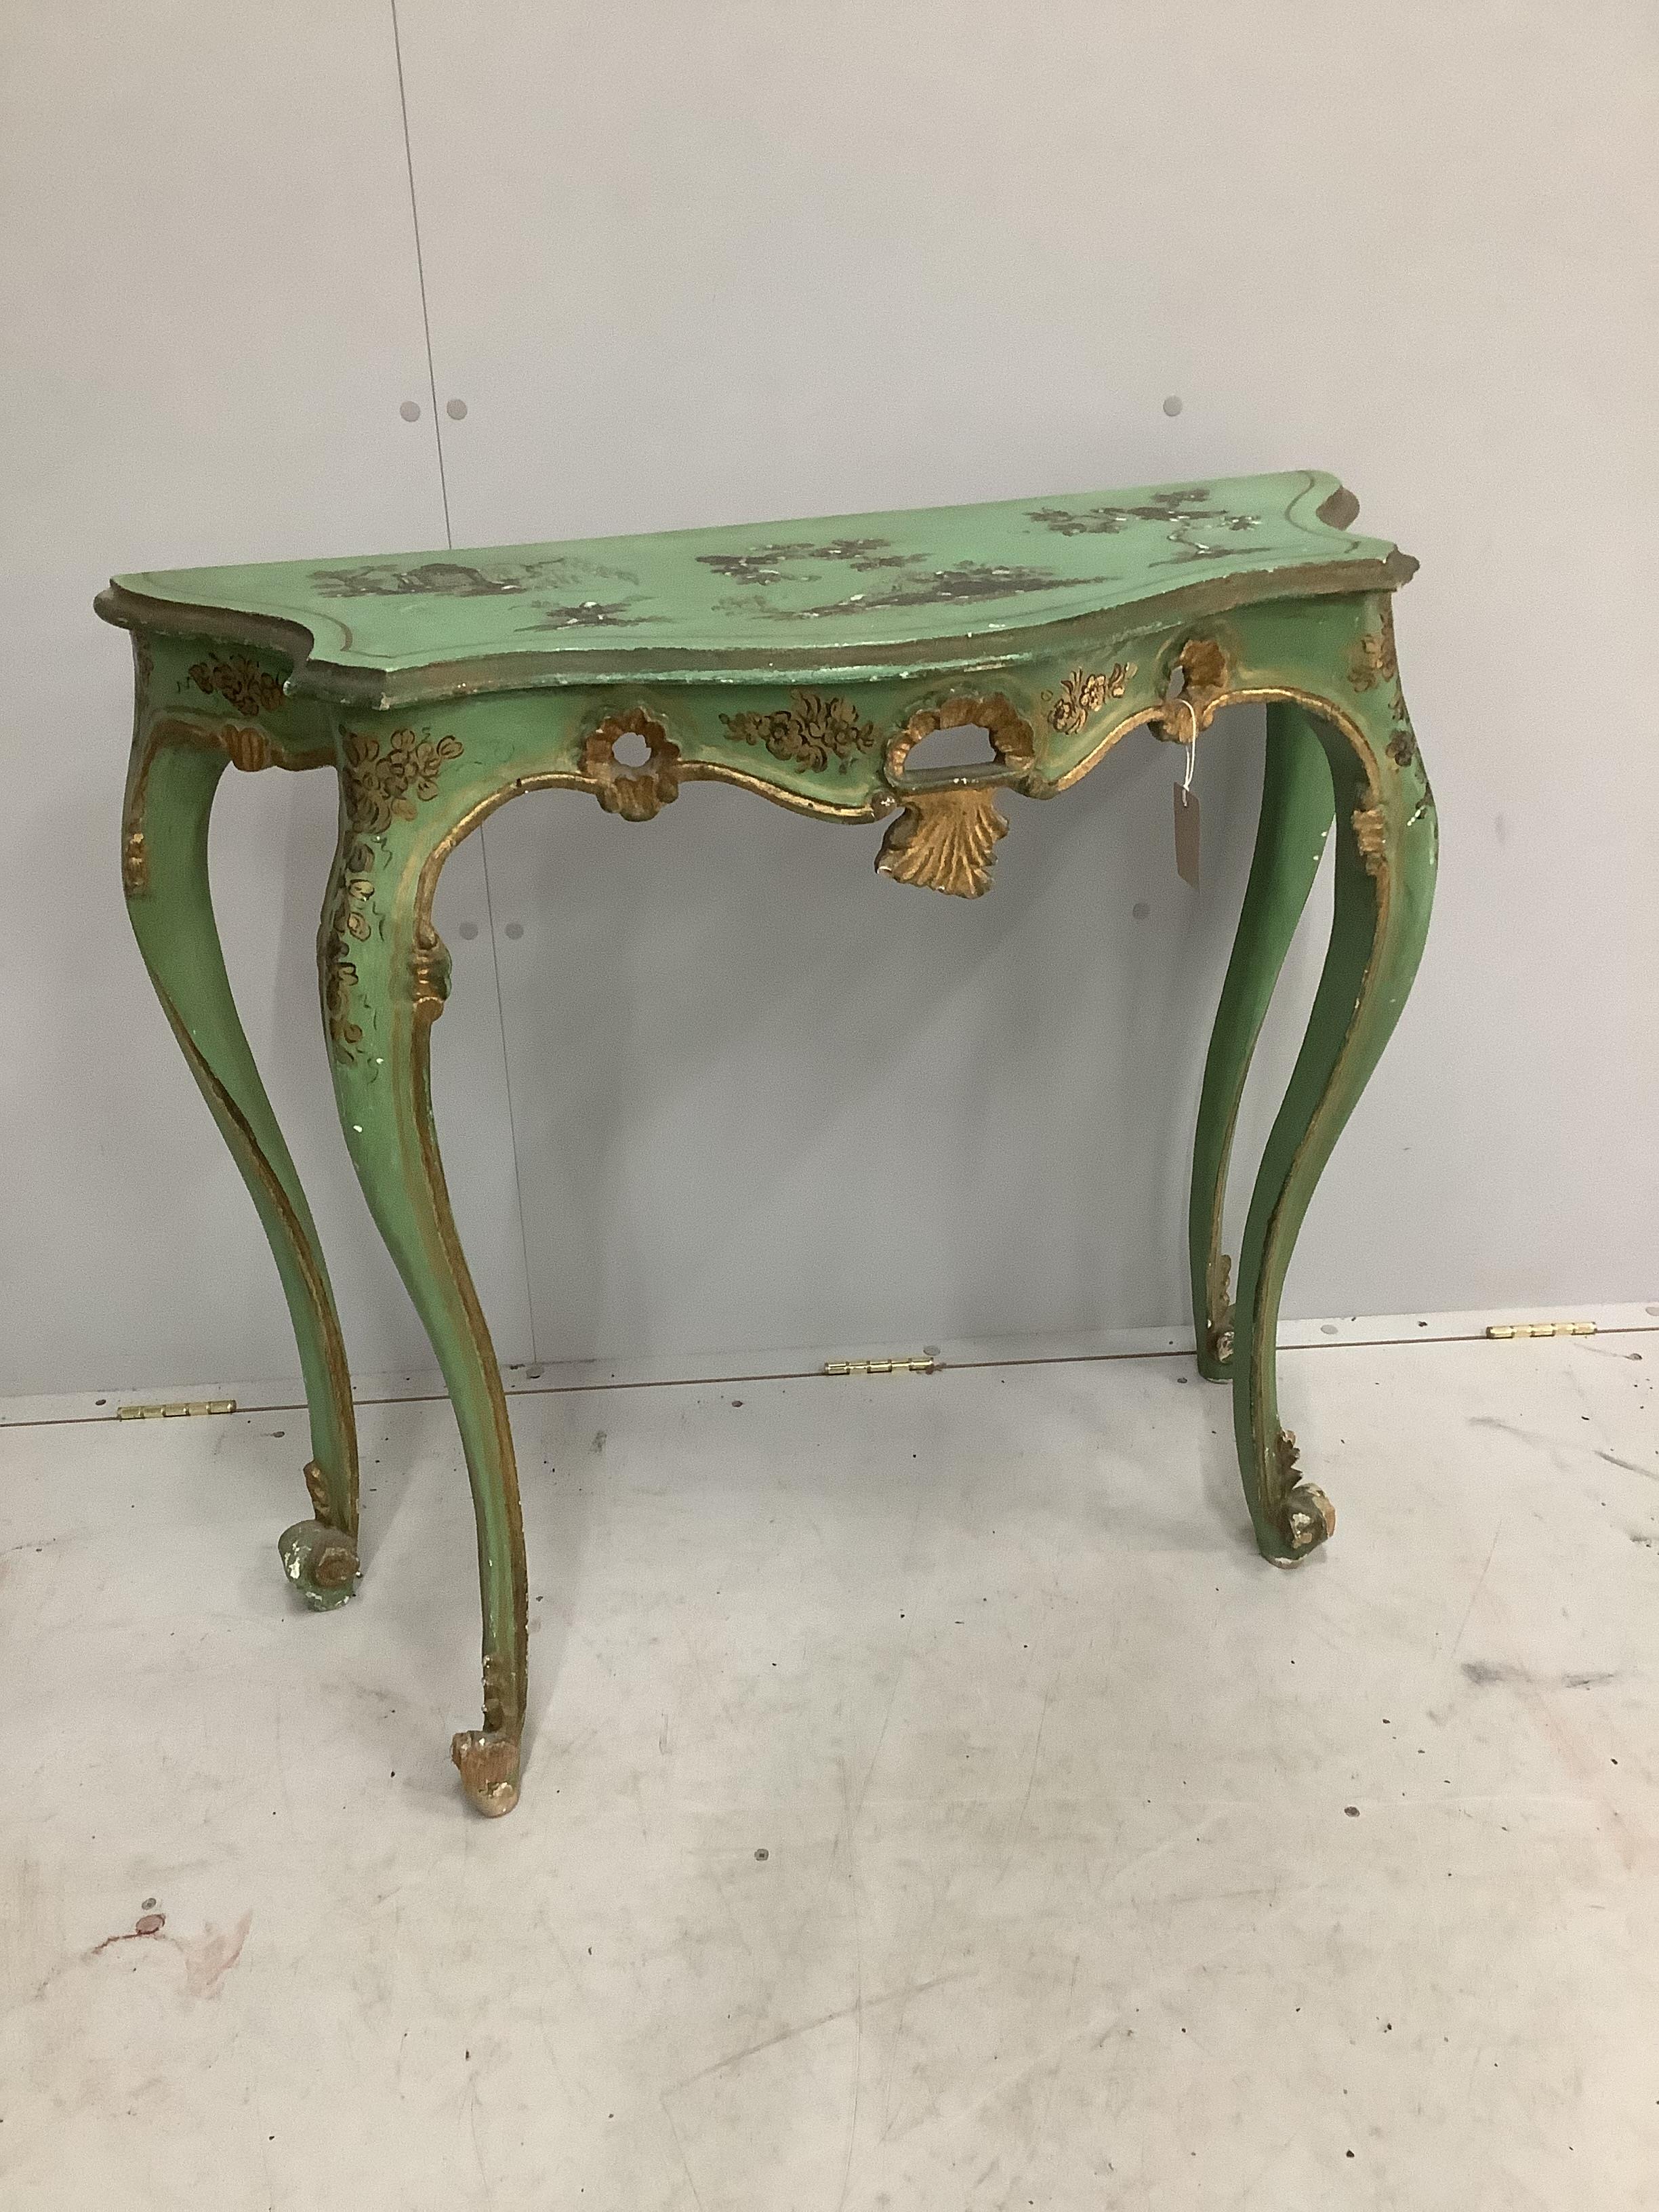 An early 20th century chinoiserie lacquer and green painted serpentine console table, width 93cm, depth 36cm, height 86cm